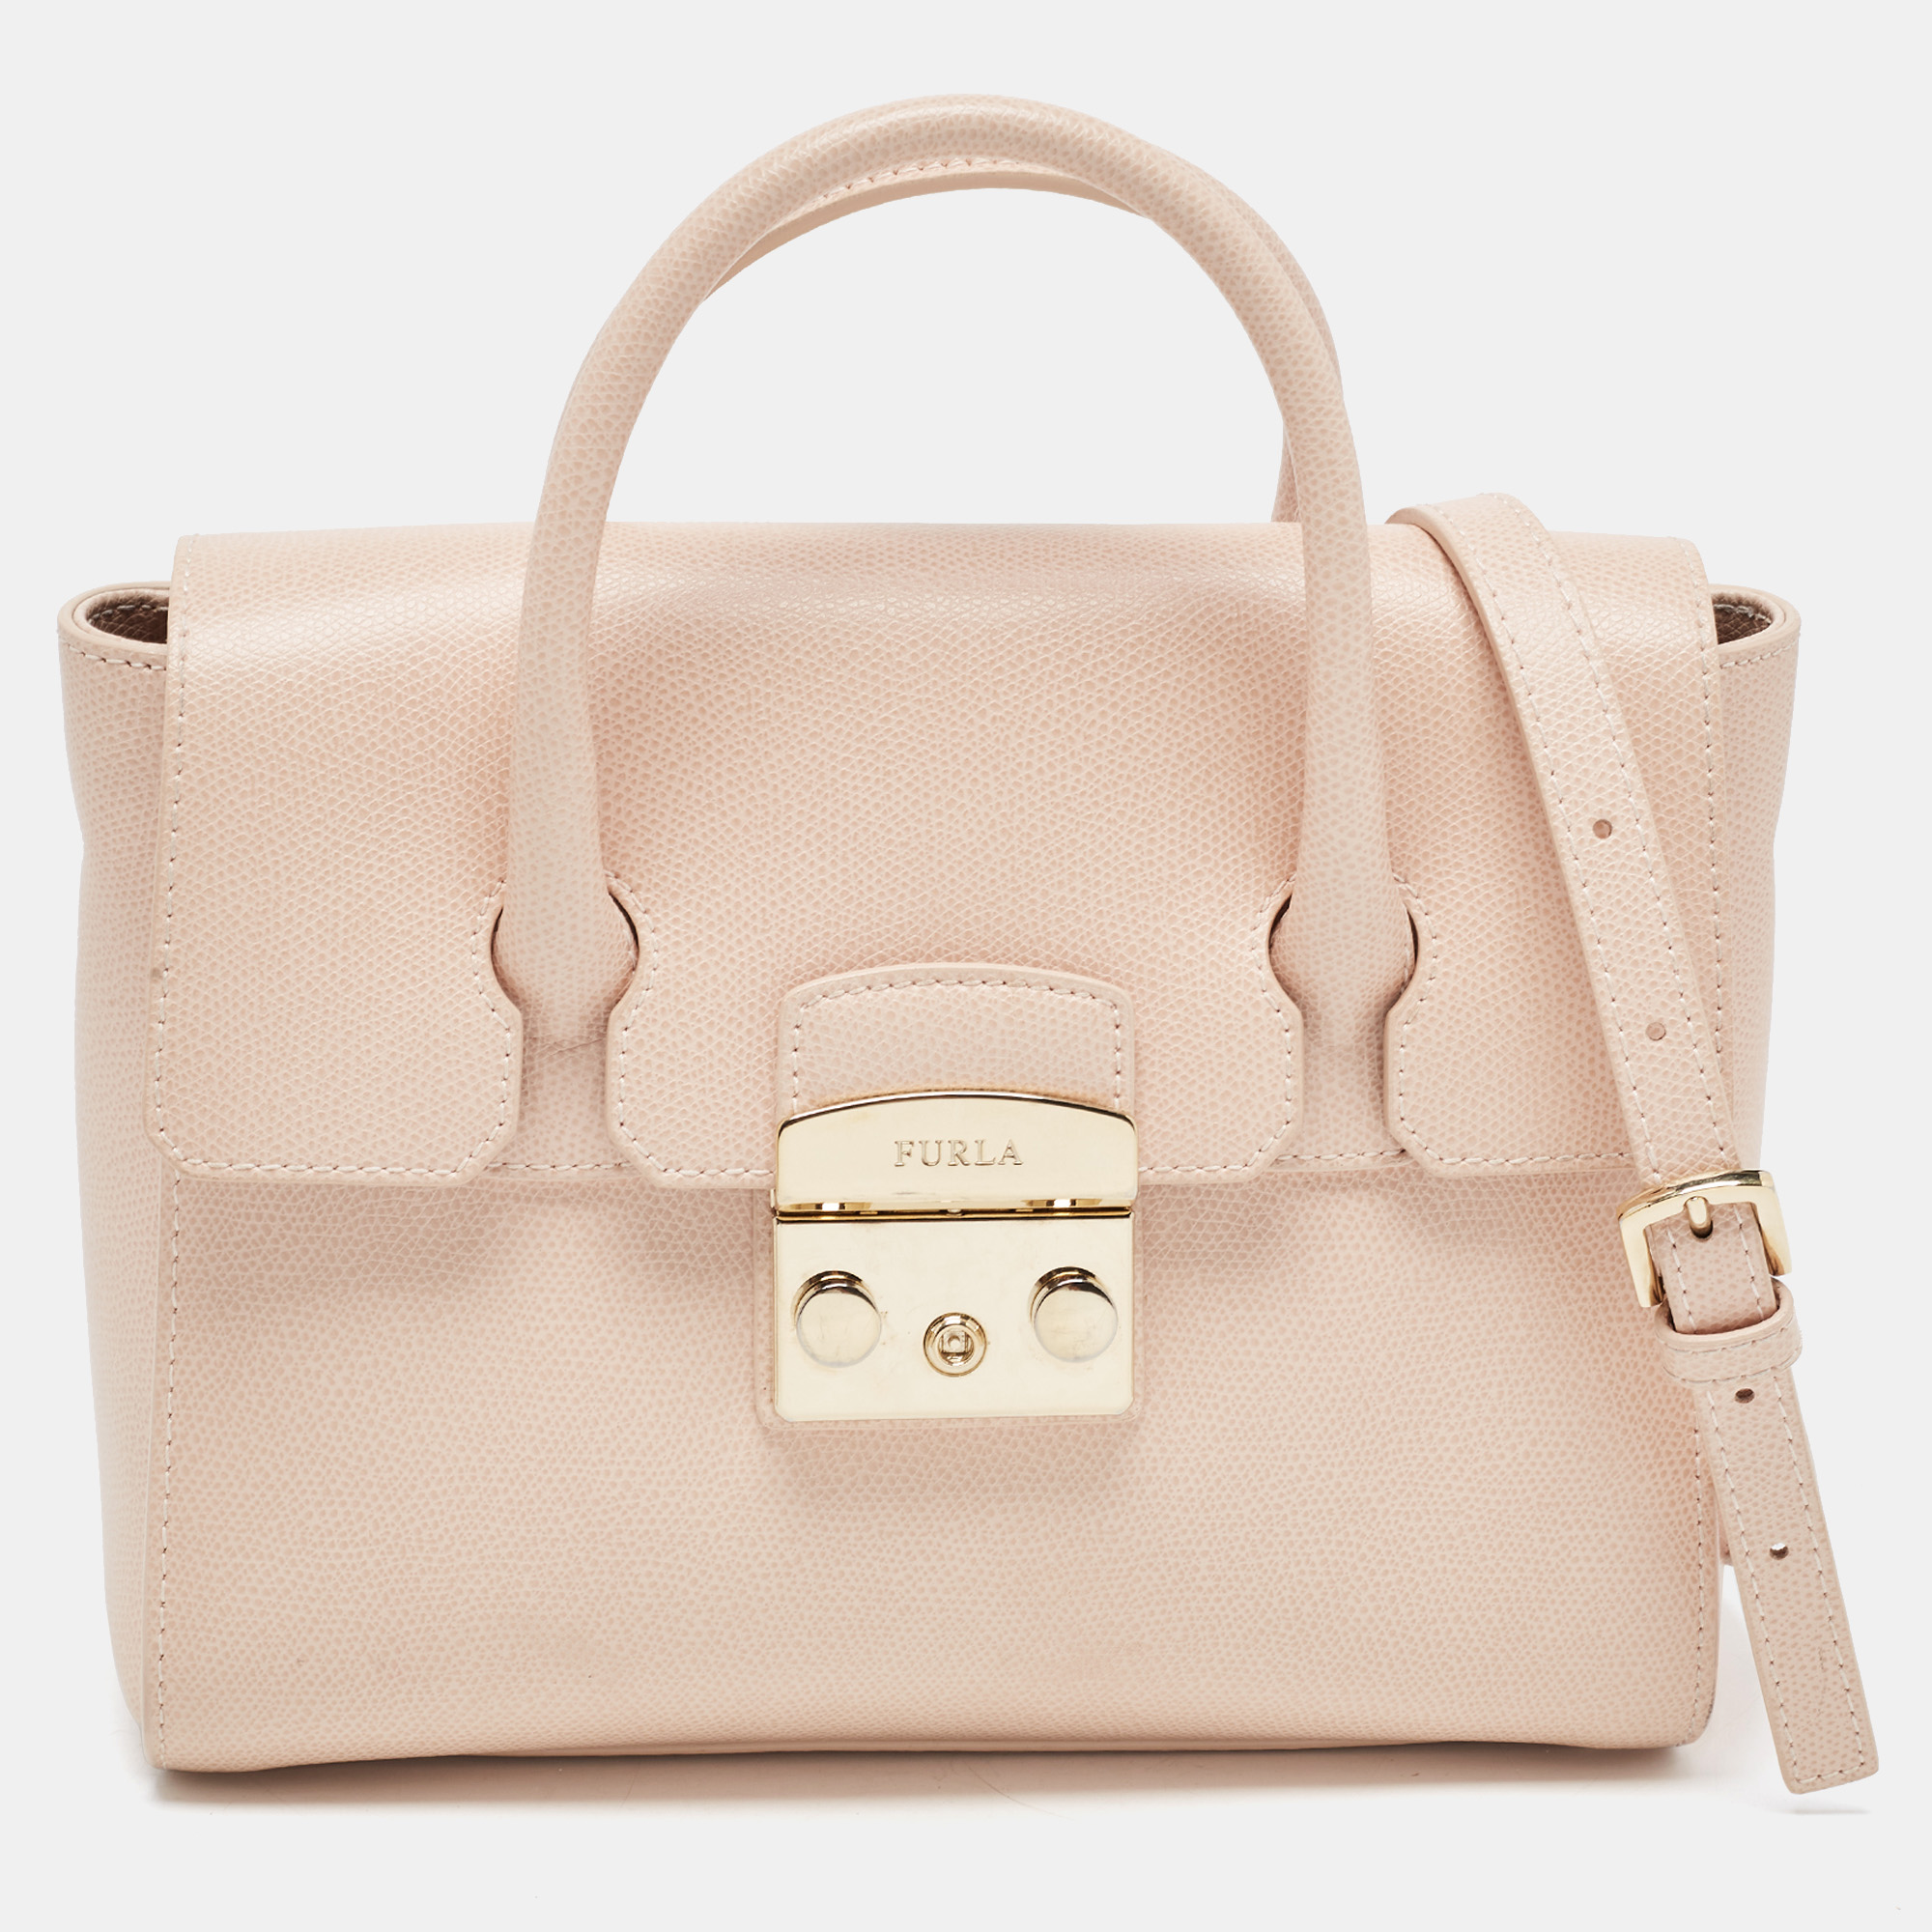 Furla - Sally Small Saffiano Leather Tote Old Pink